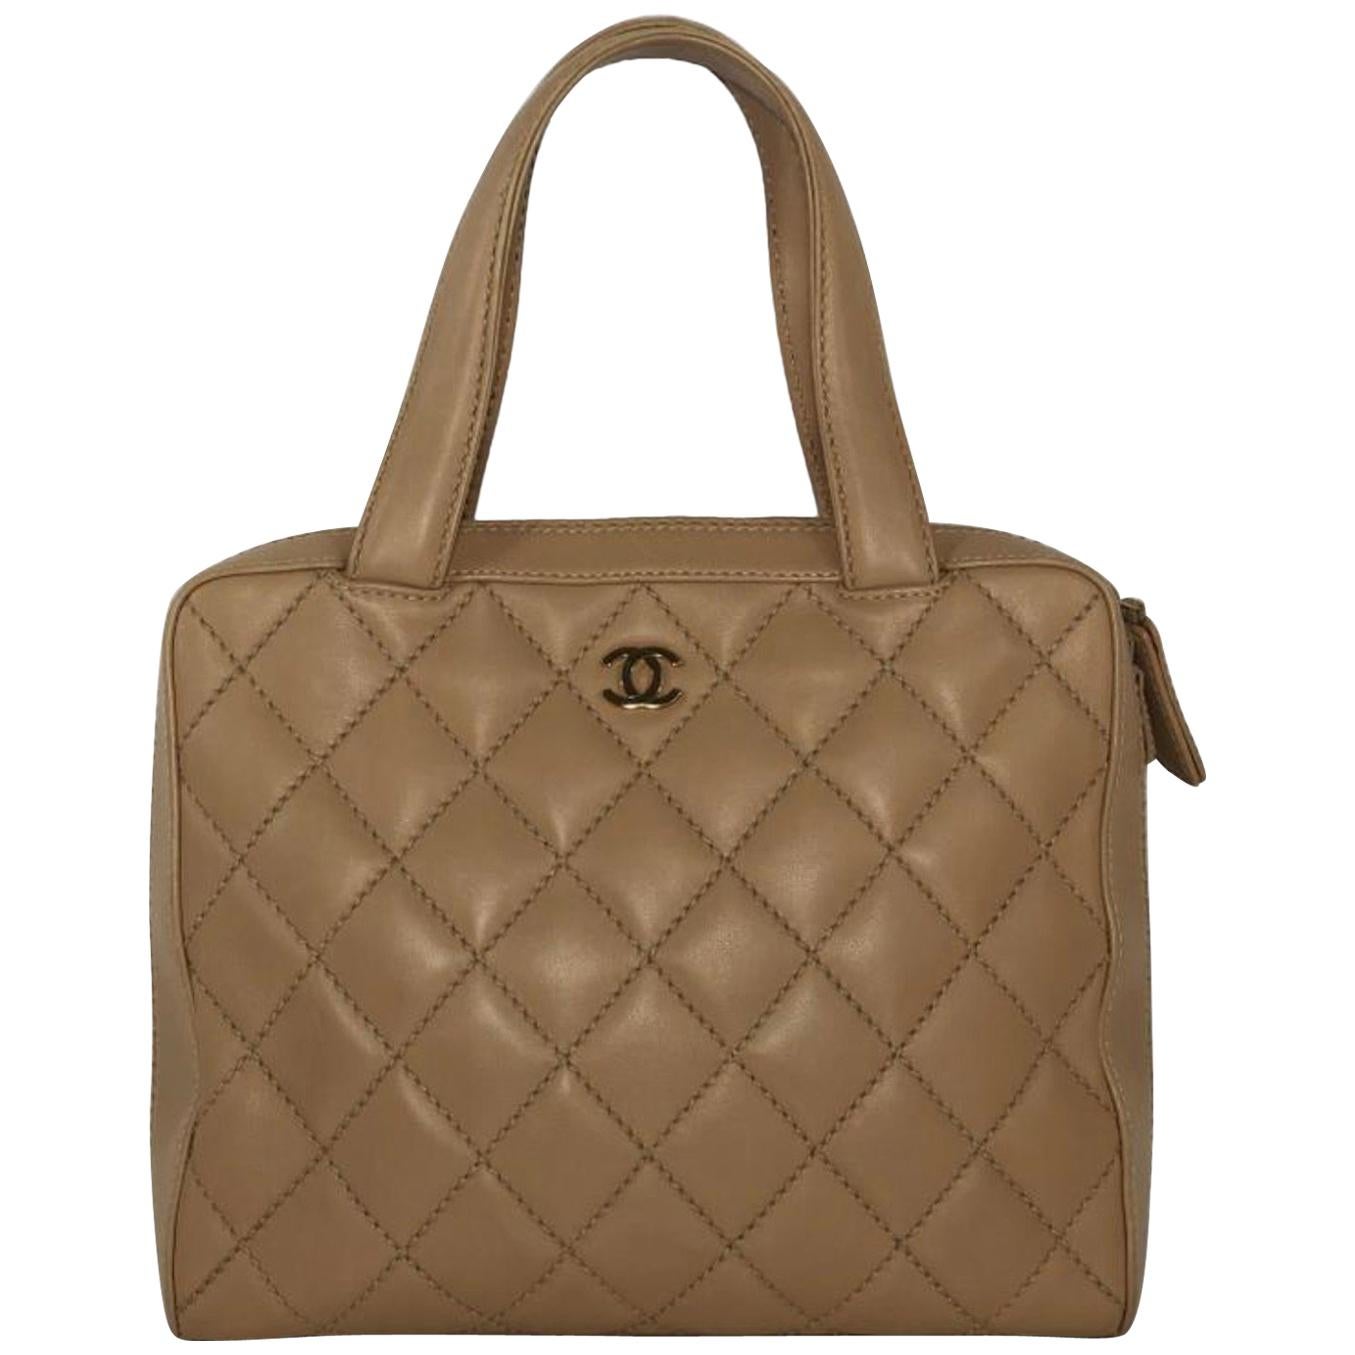 Chanel Lambskin Leather Wild Stitch Large Shoulder with Gold Hardware in Beige For Sale